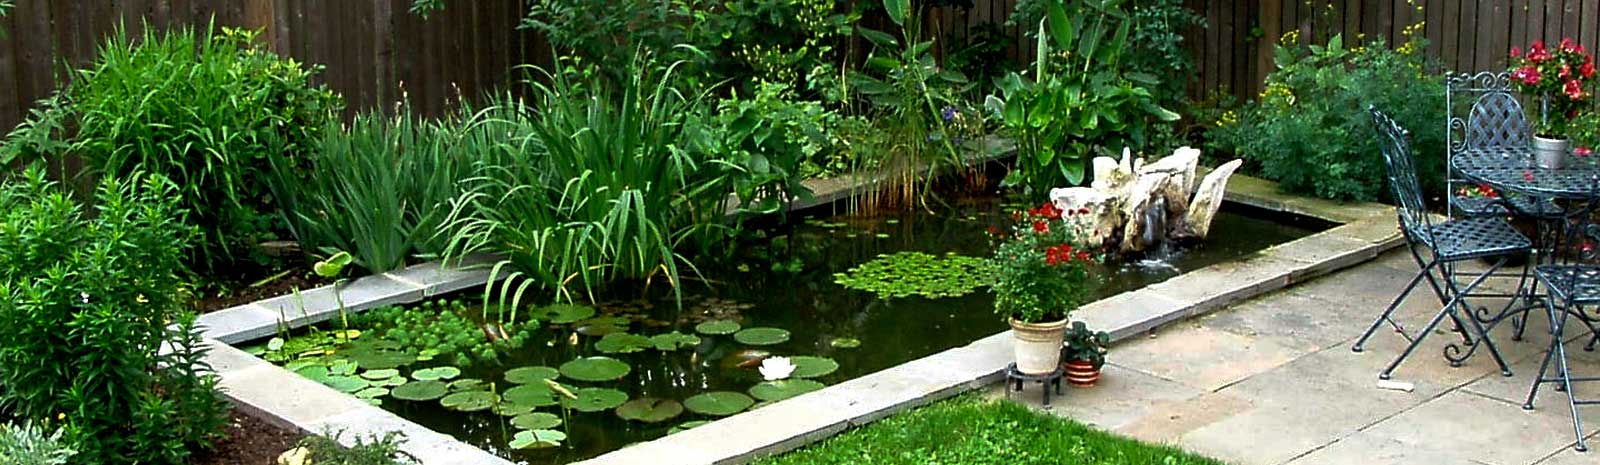 Beautiful pond and patio - Pondscapes Maryland can make your backyard dreams come to life!